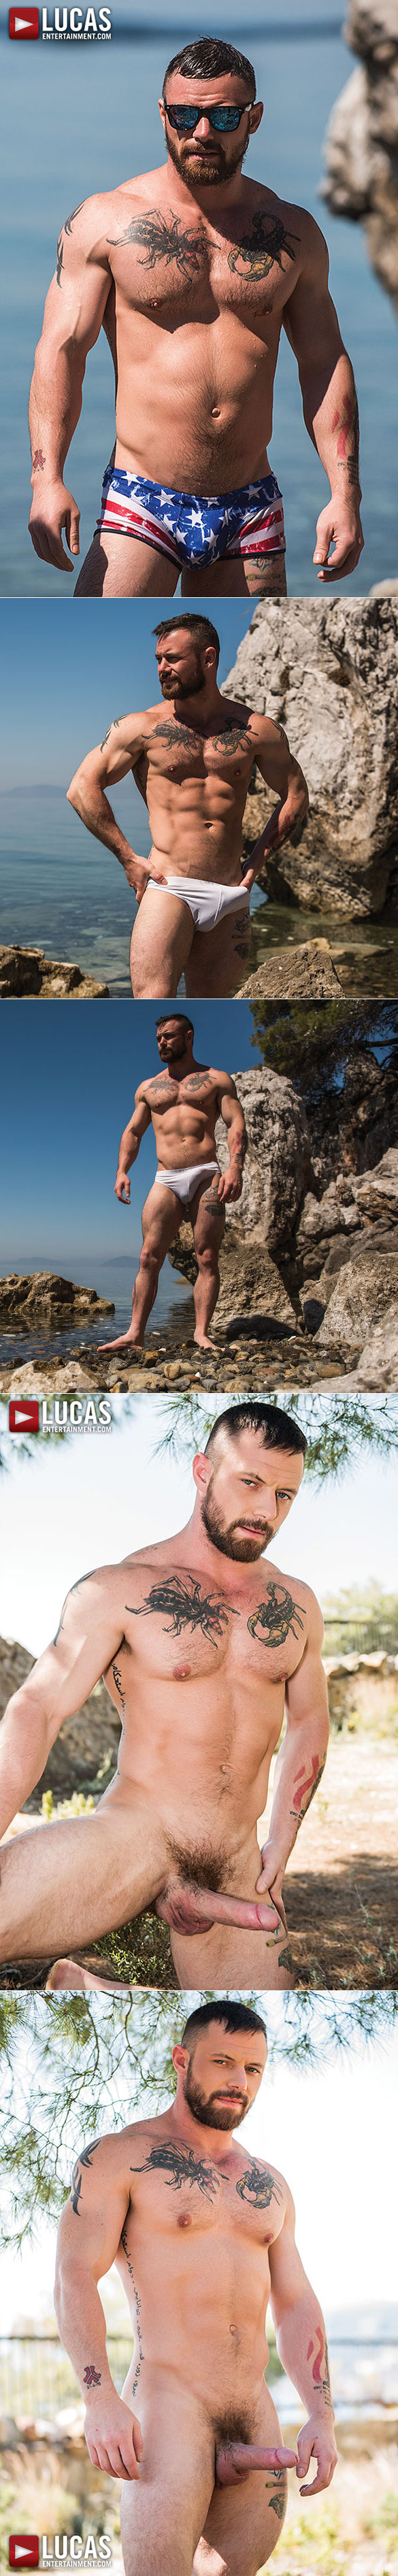 Lucas Entertainment: Sergeant Miles and Stas Landon flip fuck in “Bareback Auditions 04: Raw Recruits”